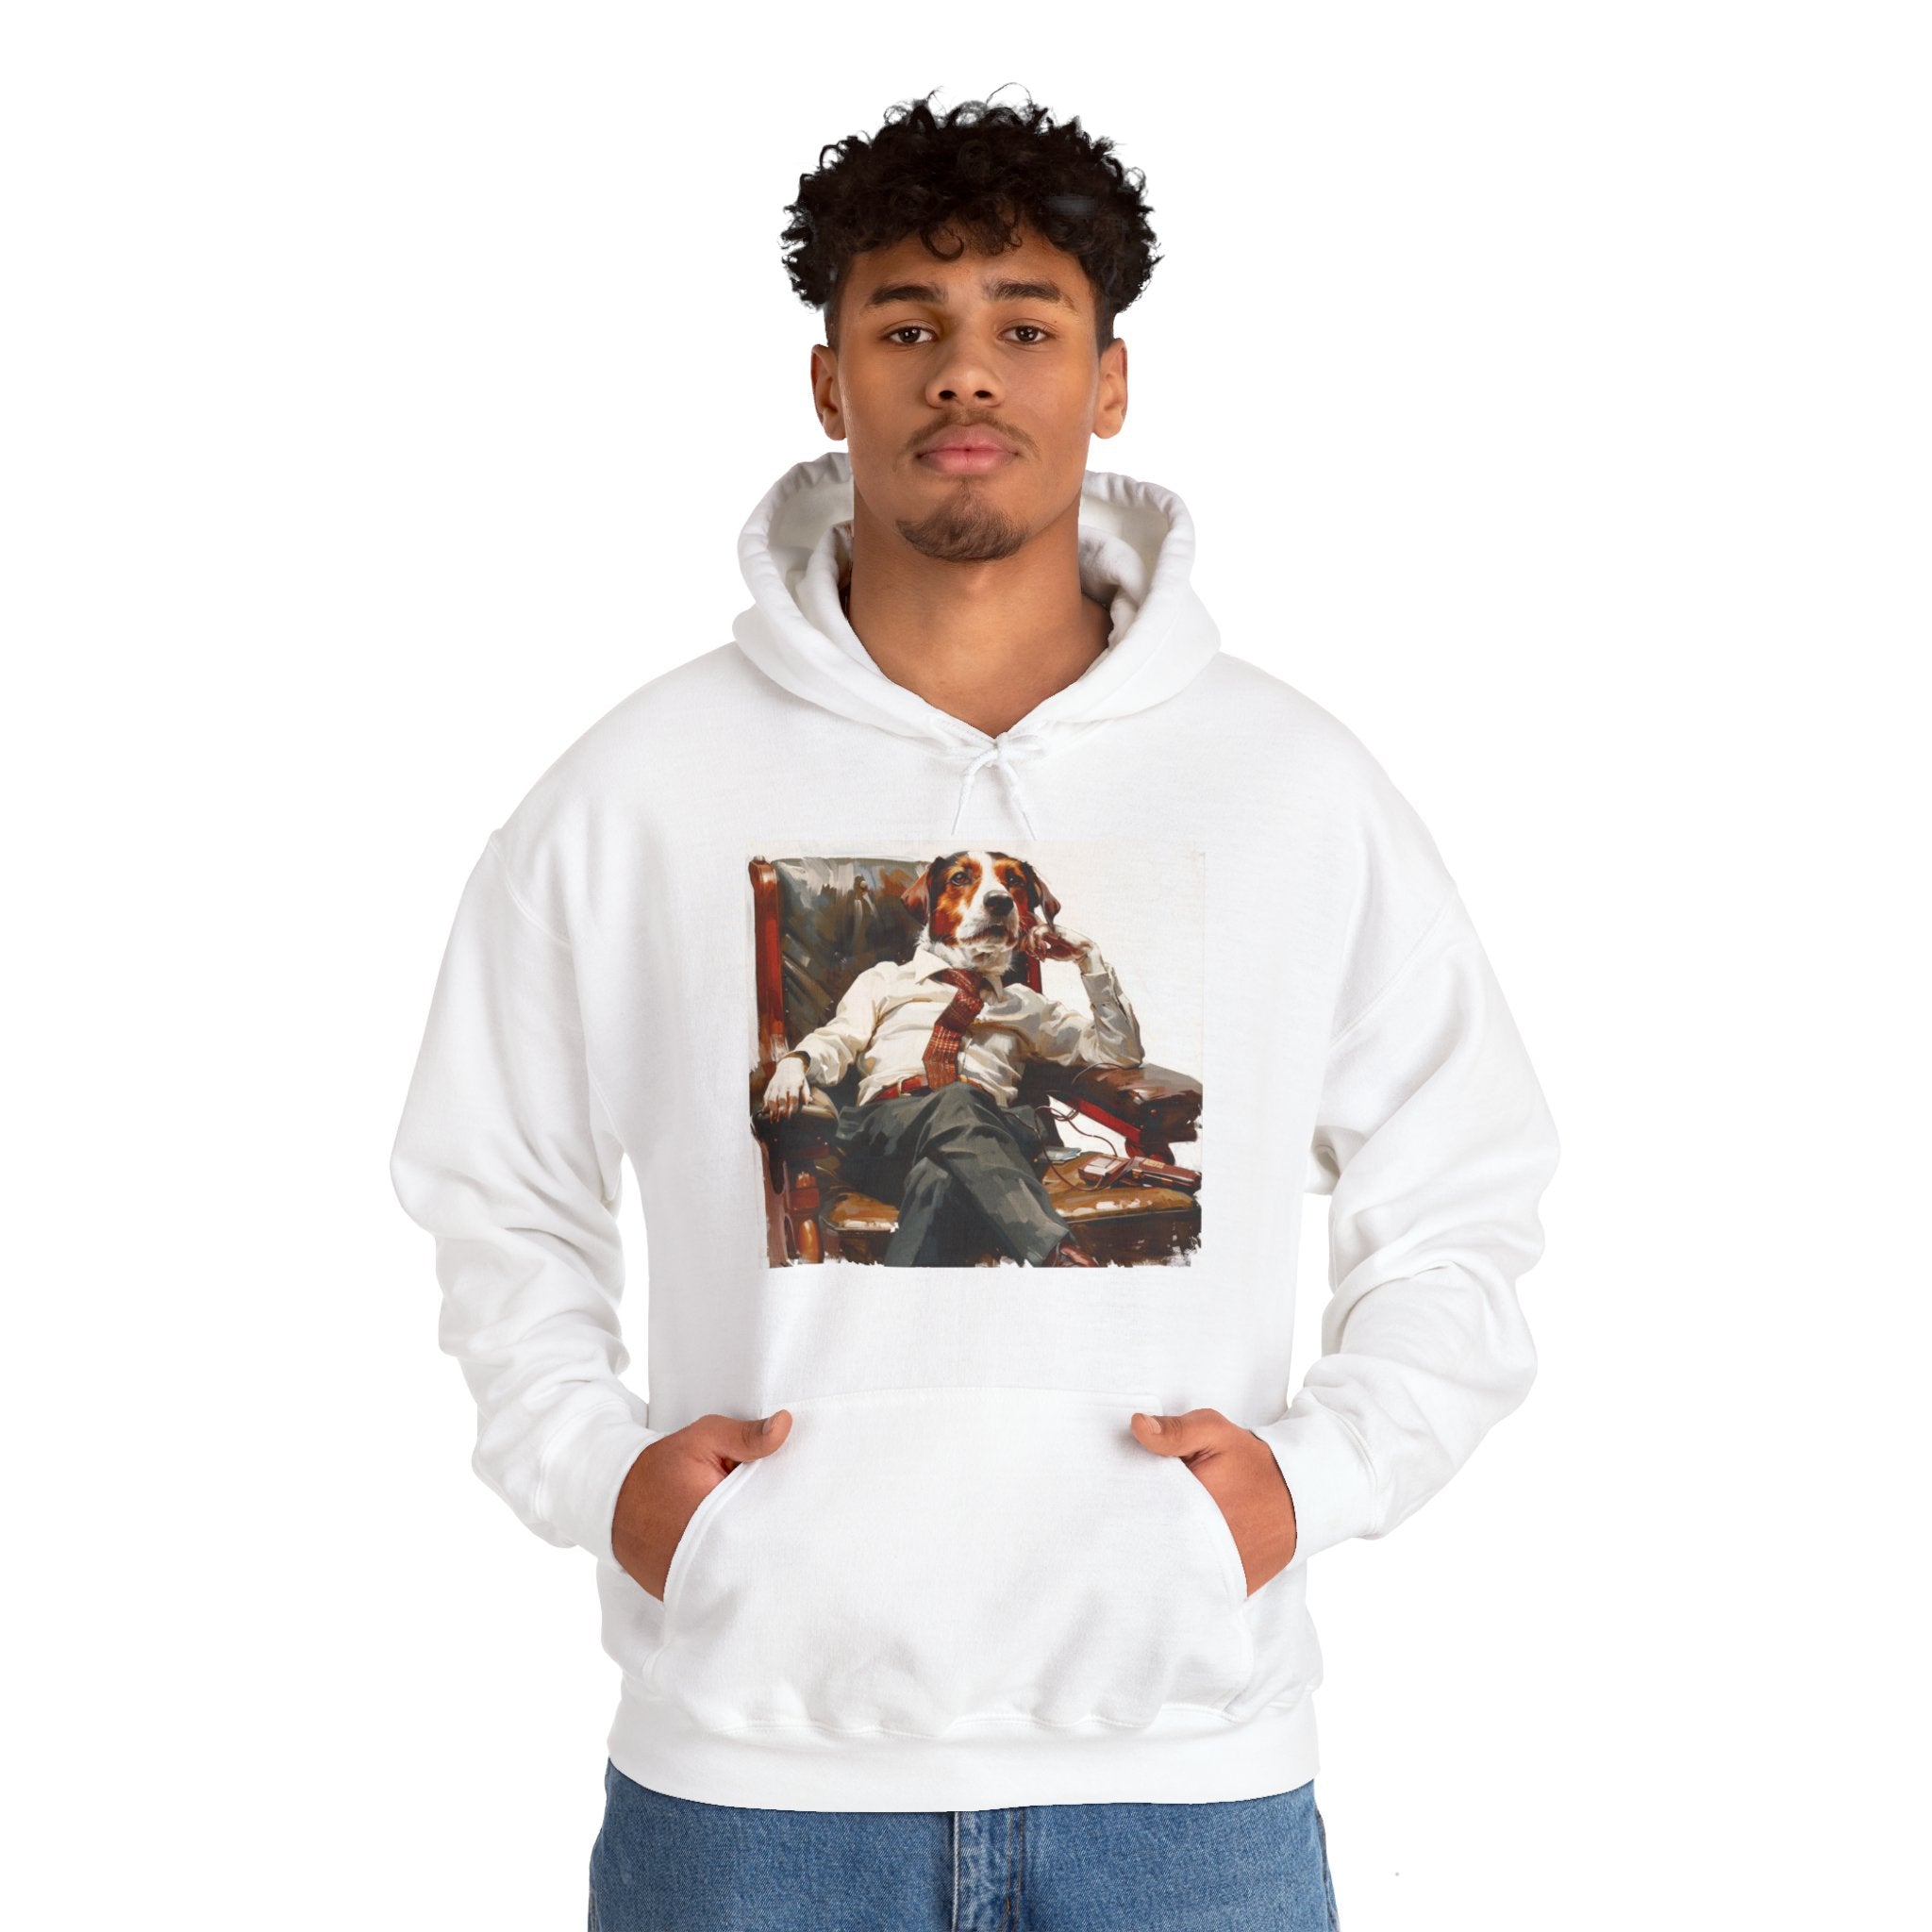 The image showcases a cozy unisex heavy blend hooded sweatshirt featuring a detailed illustration of a dog dressed as a CEO, inspired by Norman Rockwell's artistic style. The design is both humorous and sophisticated, with the hoodie’s soft, comfortable fabric and relaxed fit making it ideal for any casual occasion.